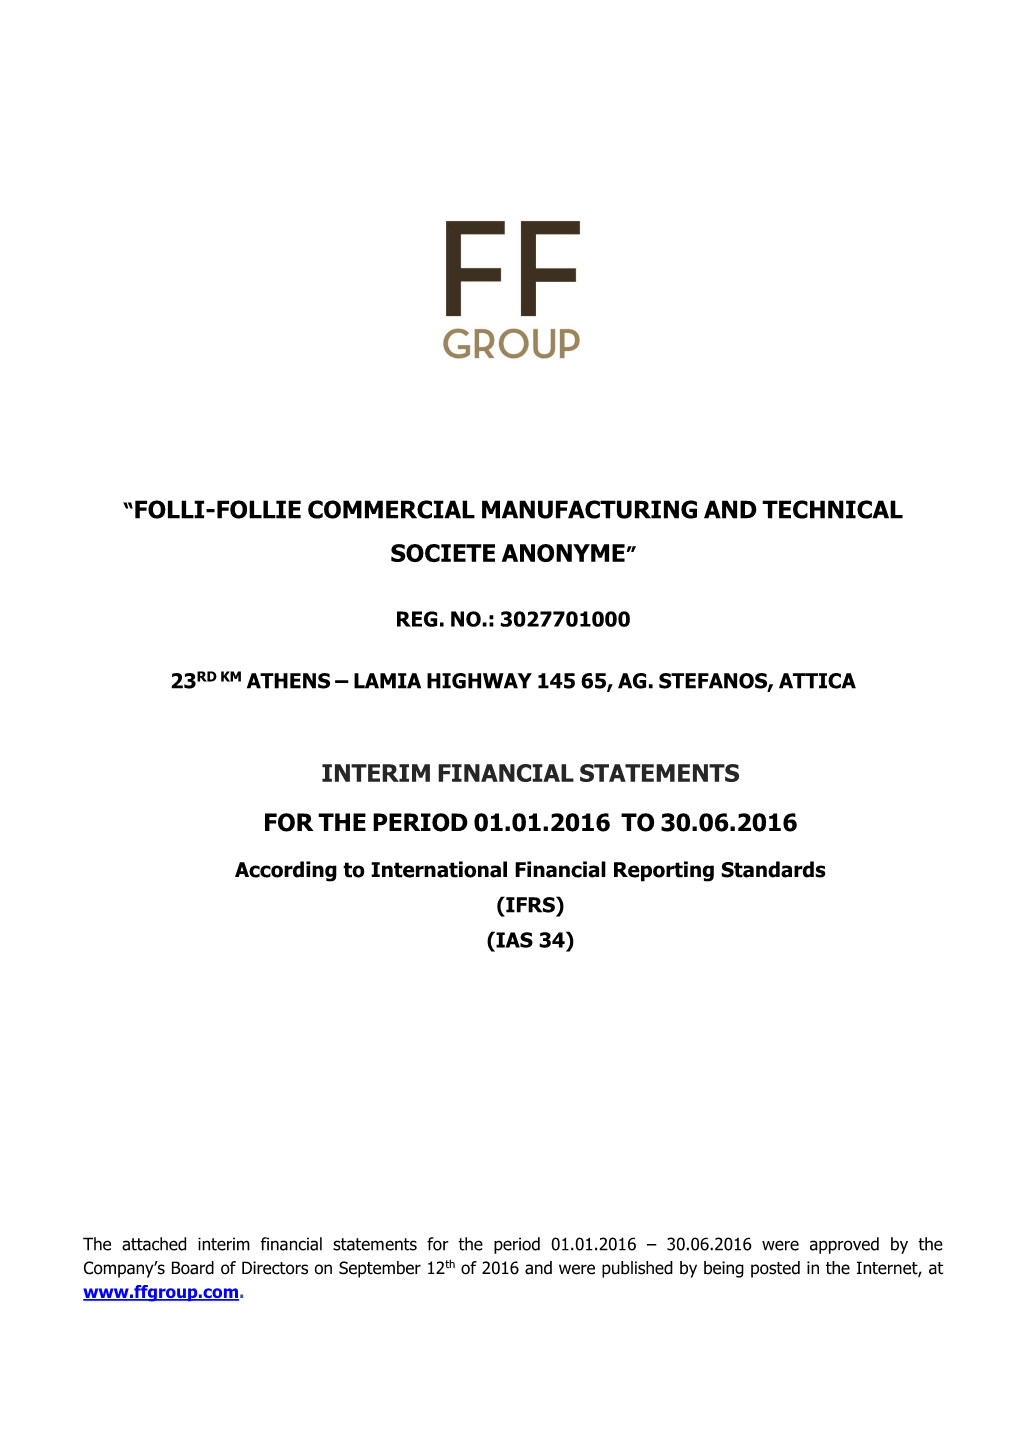 Folli-Follie Commercial Manufacturing and Technical Societe Anonyme Interim Financial Statements for the Period 01.01.2016 To